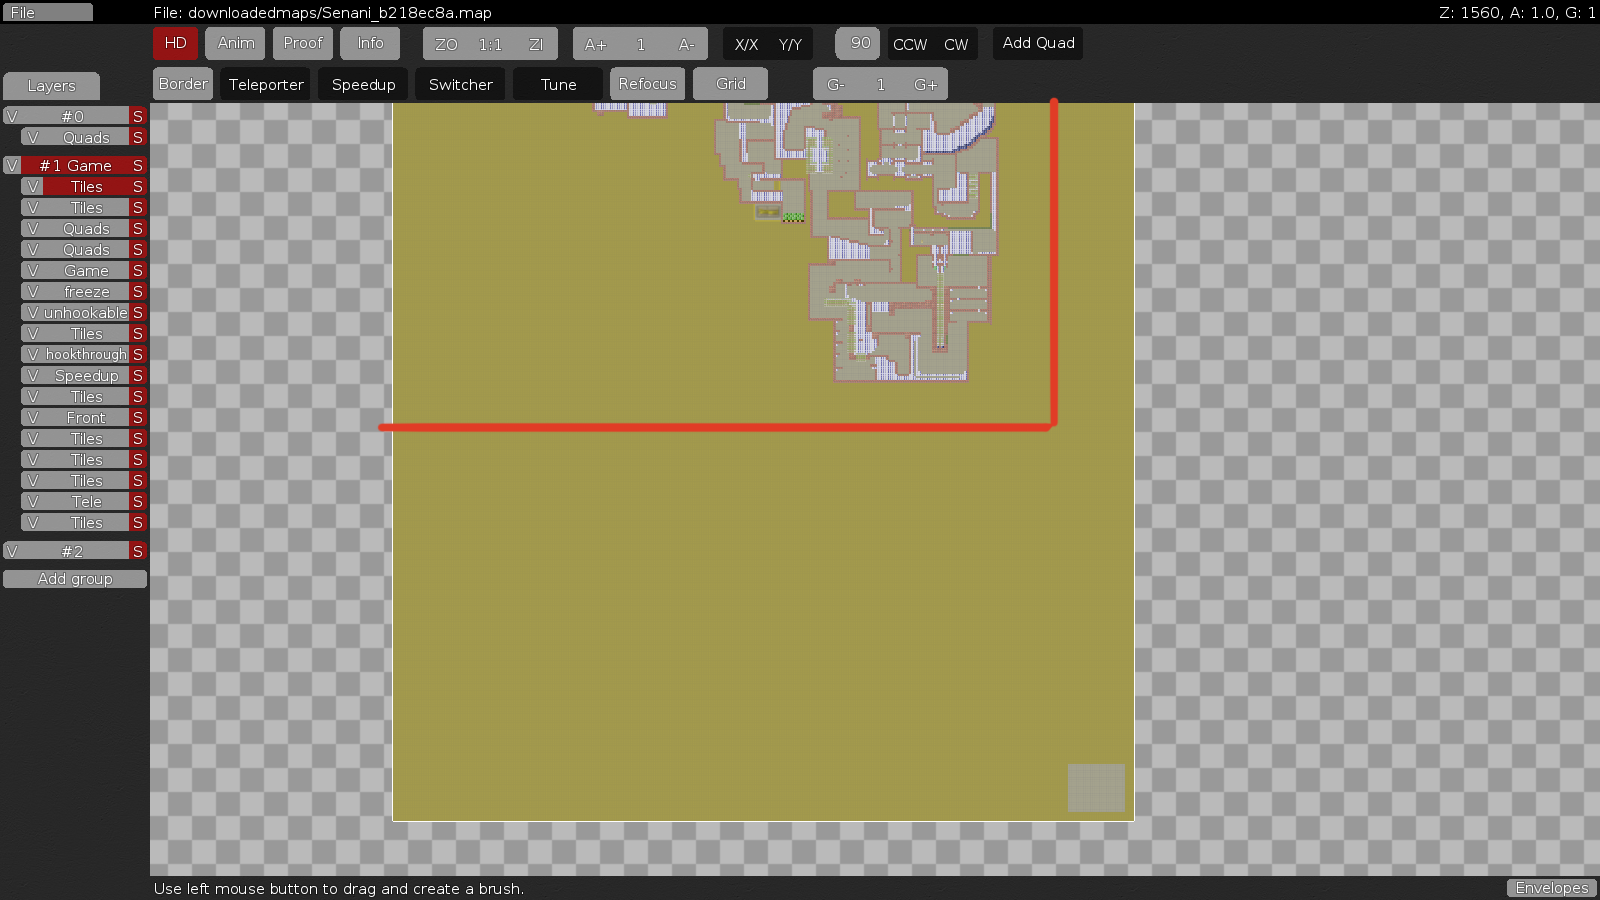 make layers in editor smaller, so your map loads faster (: